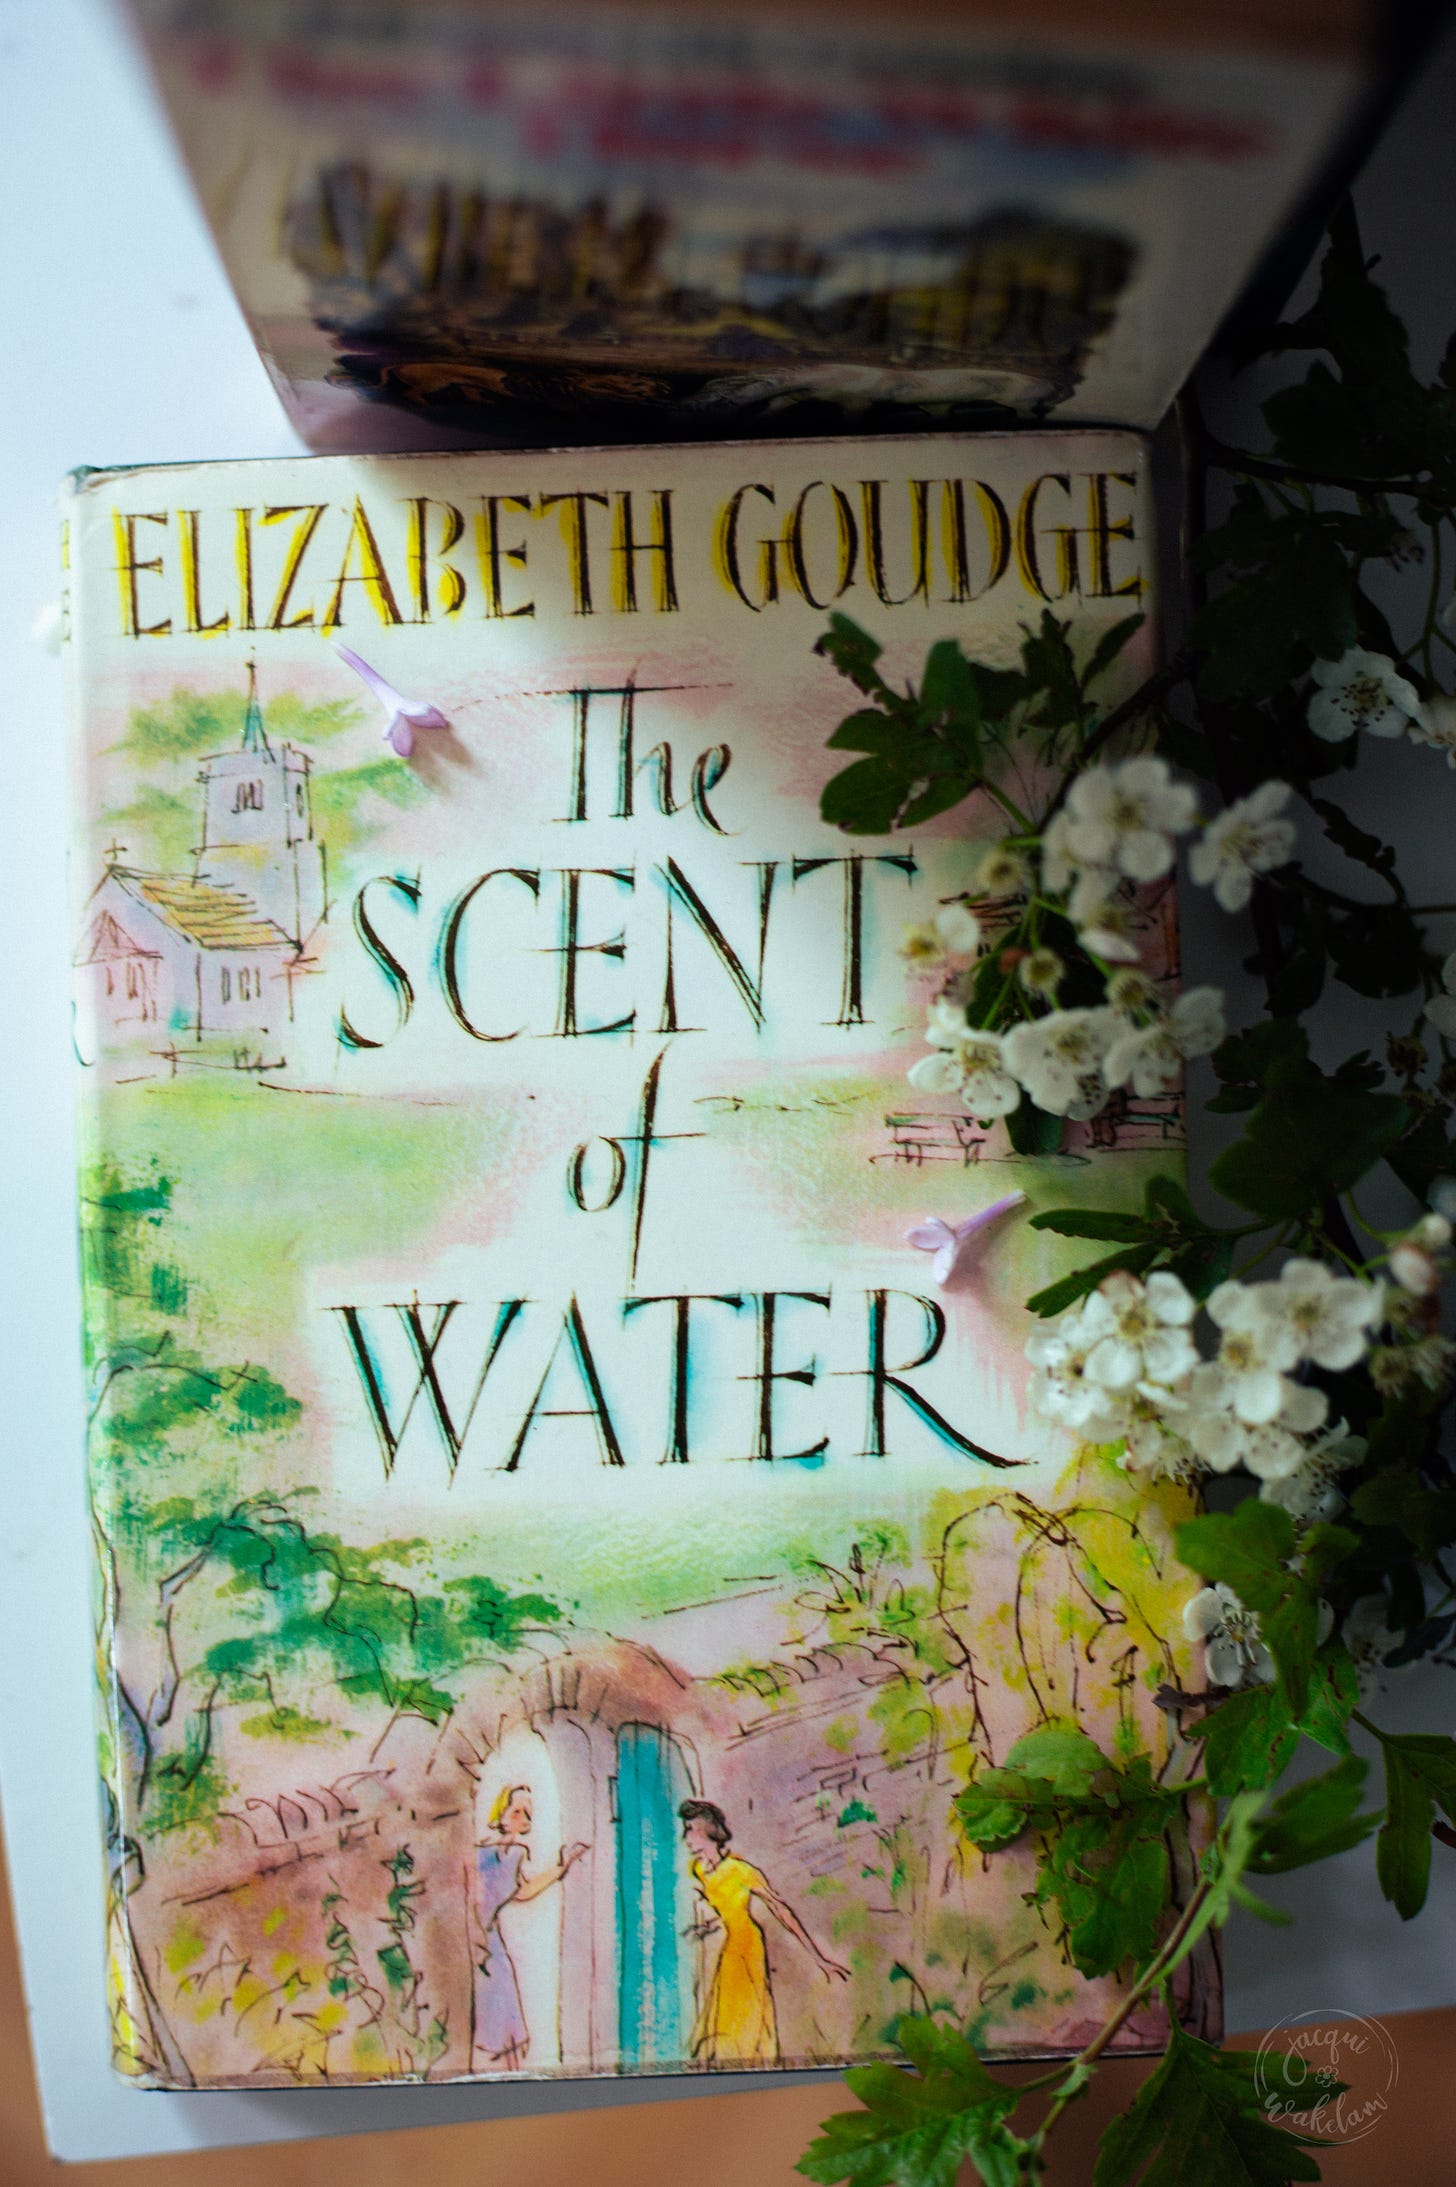 The Scent of Water edition of reader Jacqui Wakelam. Photo by Jacqui Wakelam